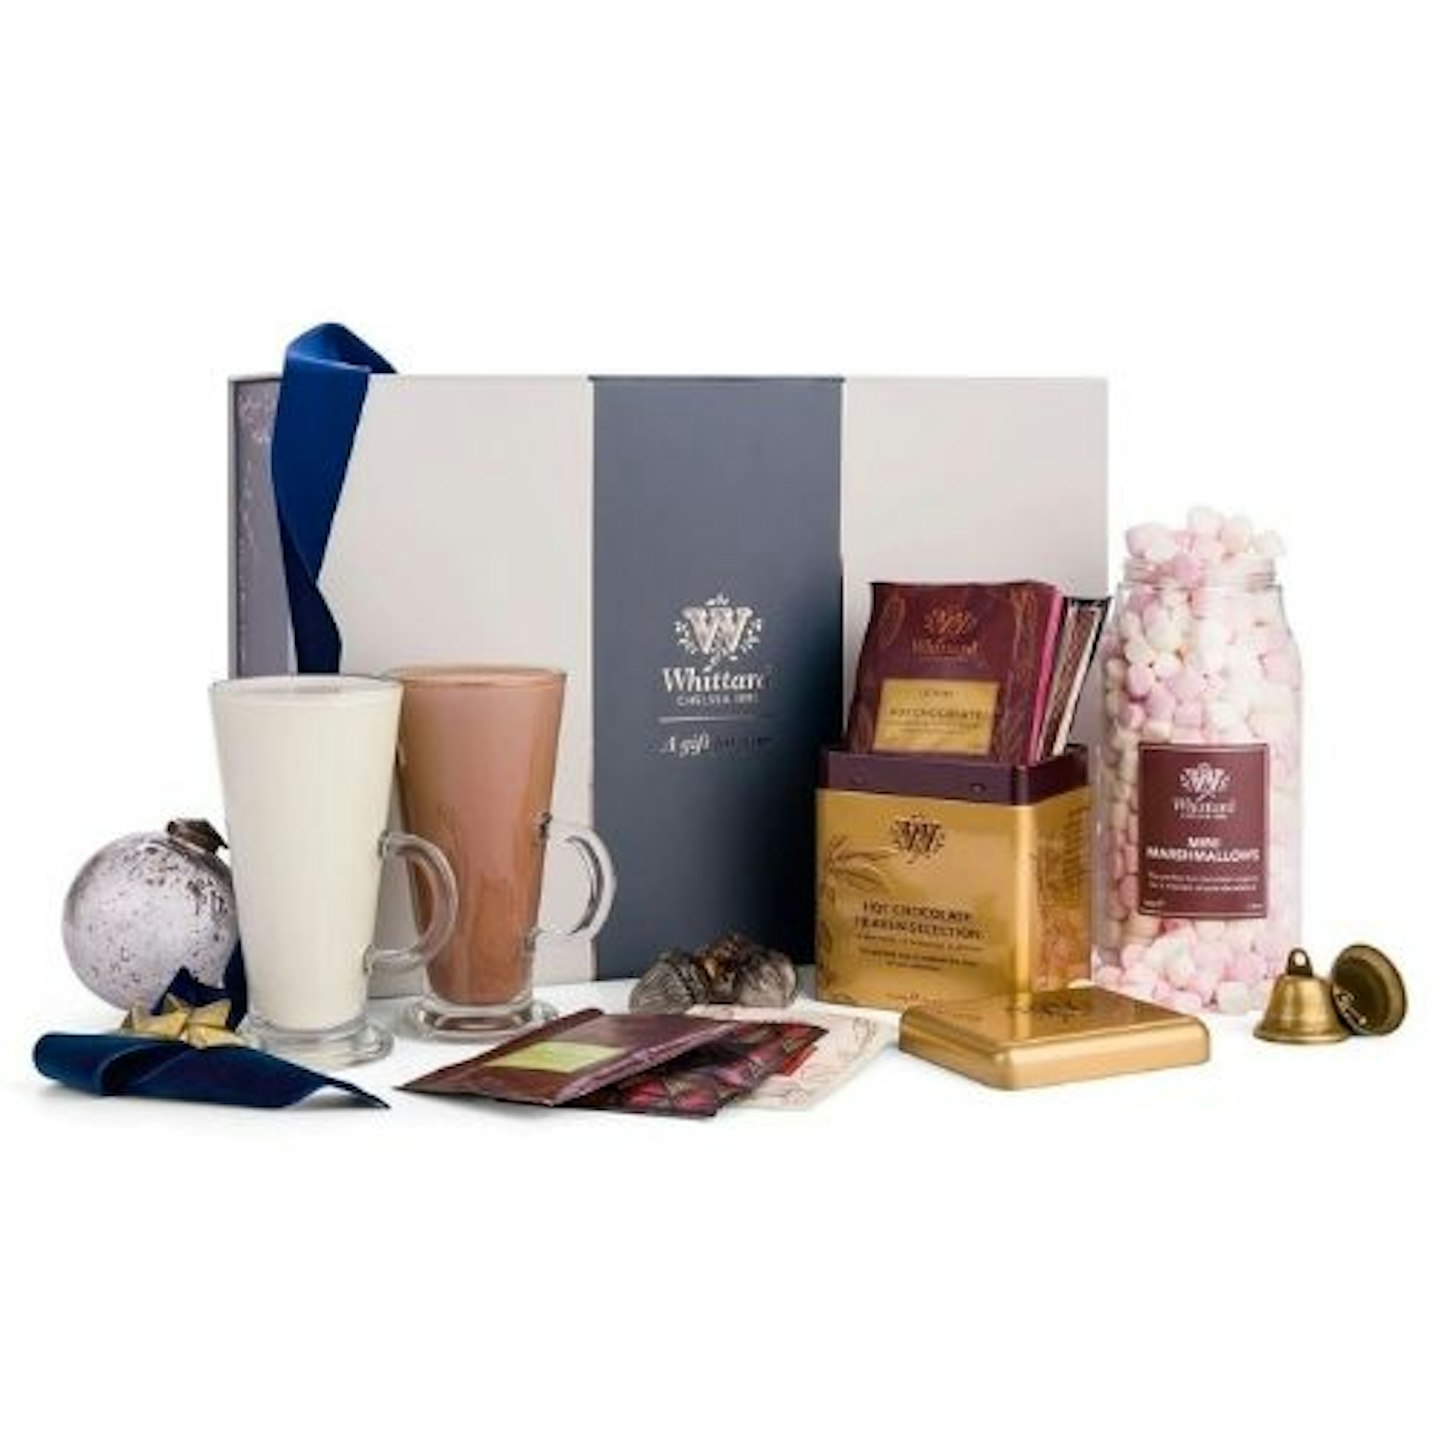 The Hot Chocolate Discovery Gift Box